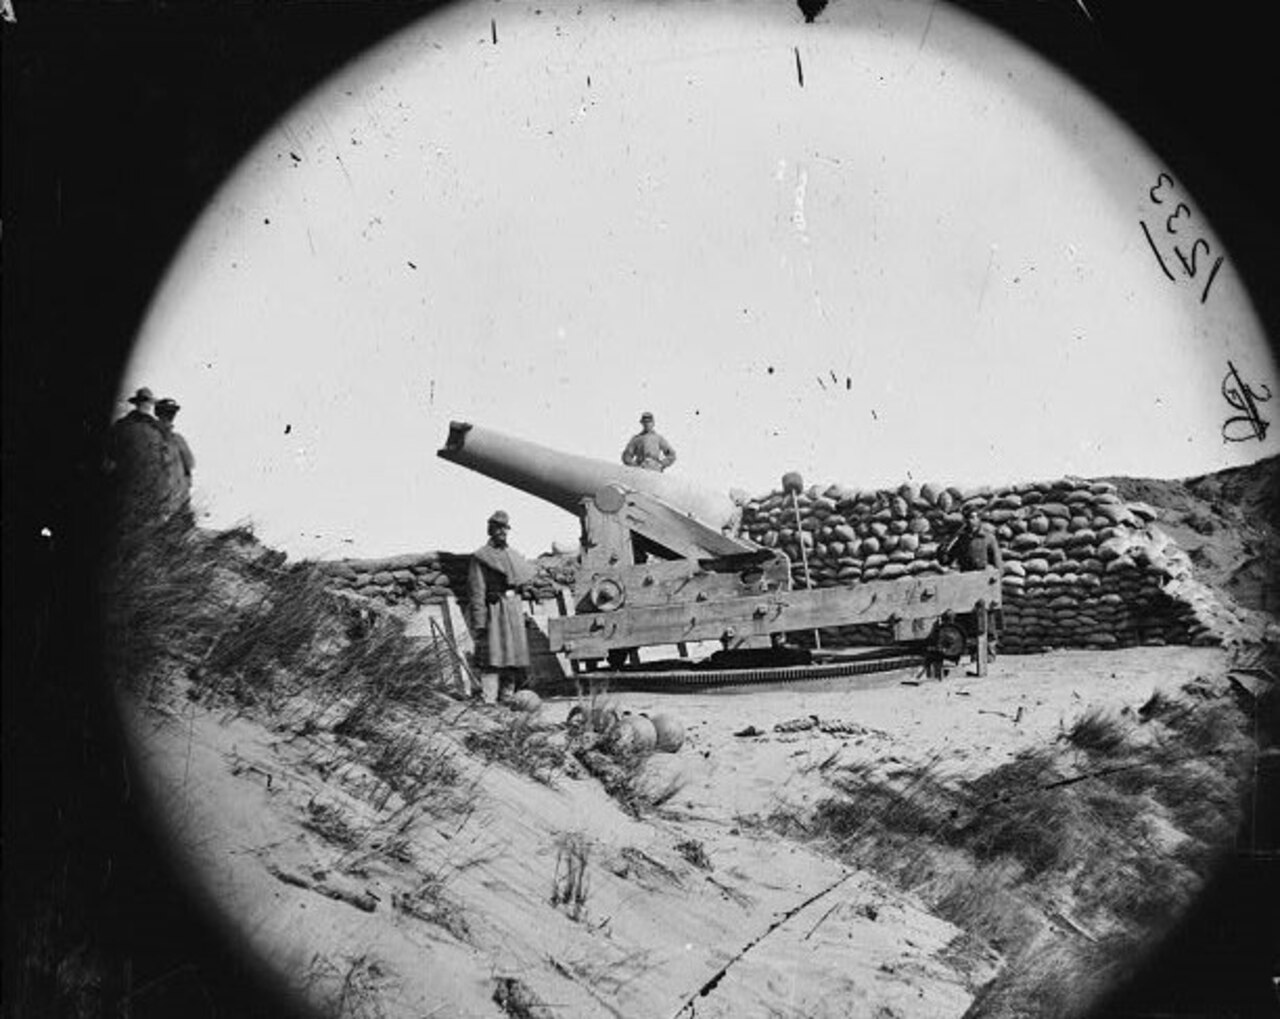 Three men stand beside a large cannon on a beach. Behind it is a pile of sandbags.